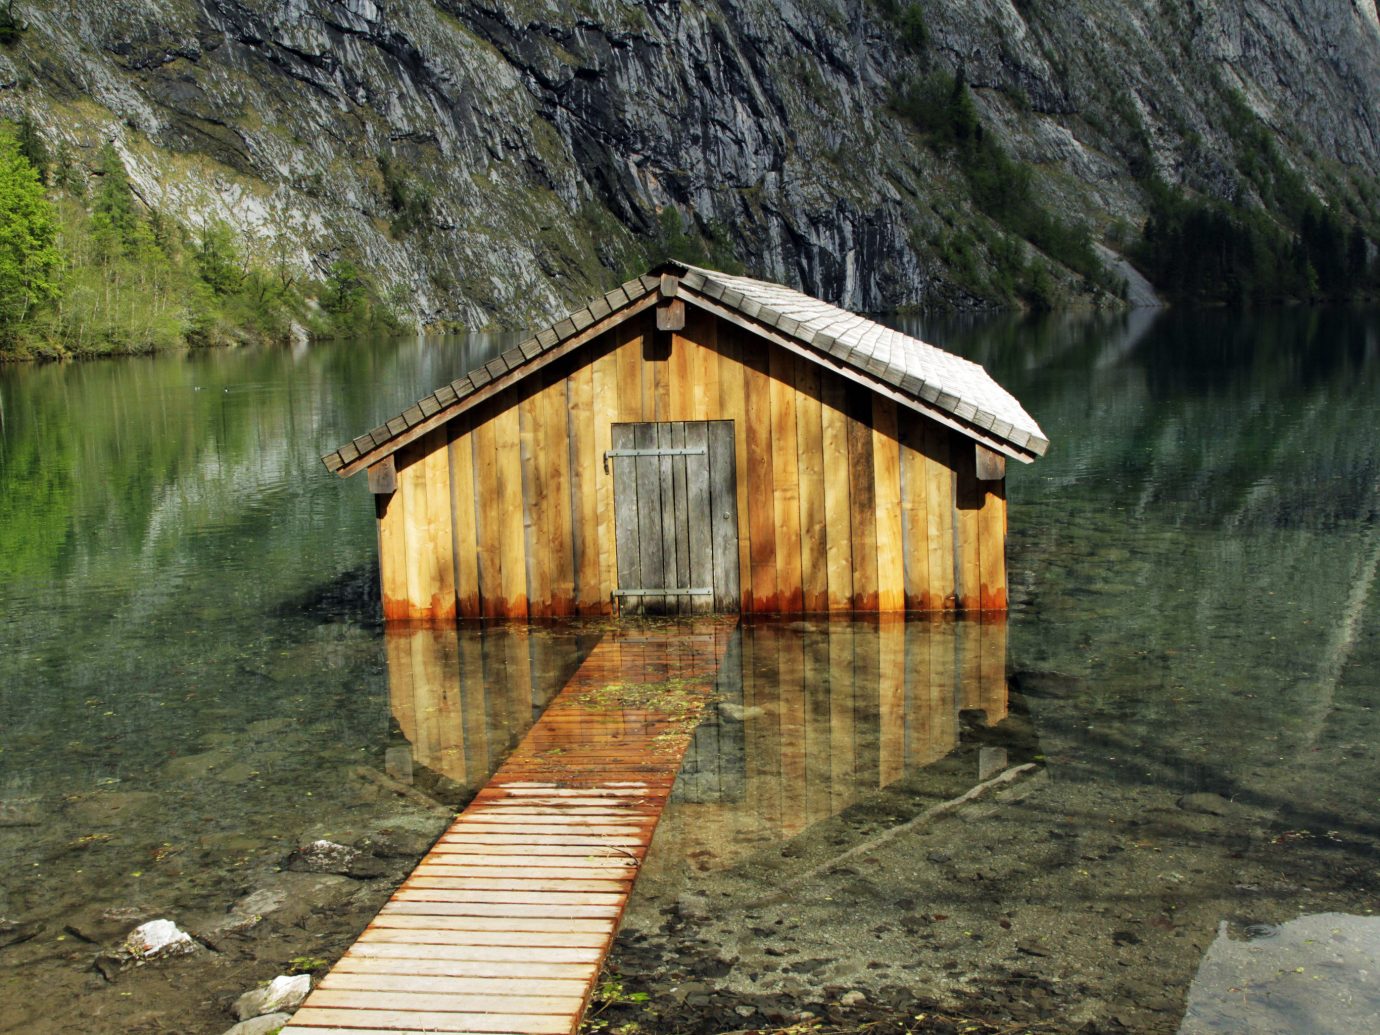 water outdoor River Lake mountain hut bridge rural area pond infrastructure reflection reservoir stone surrounded